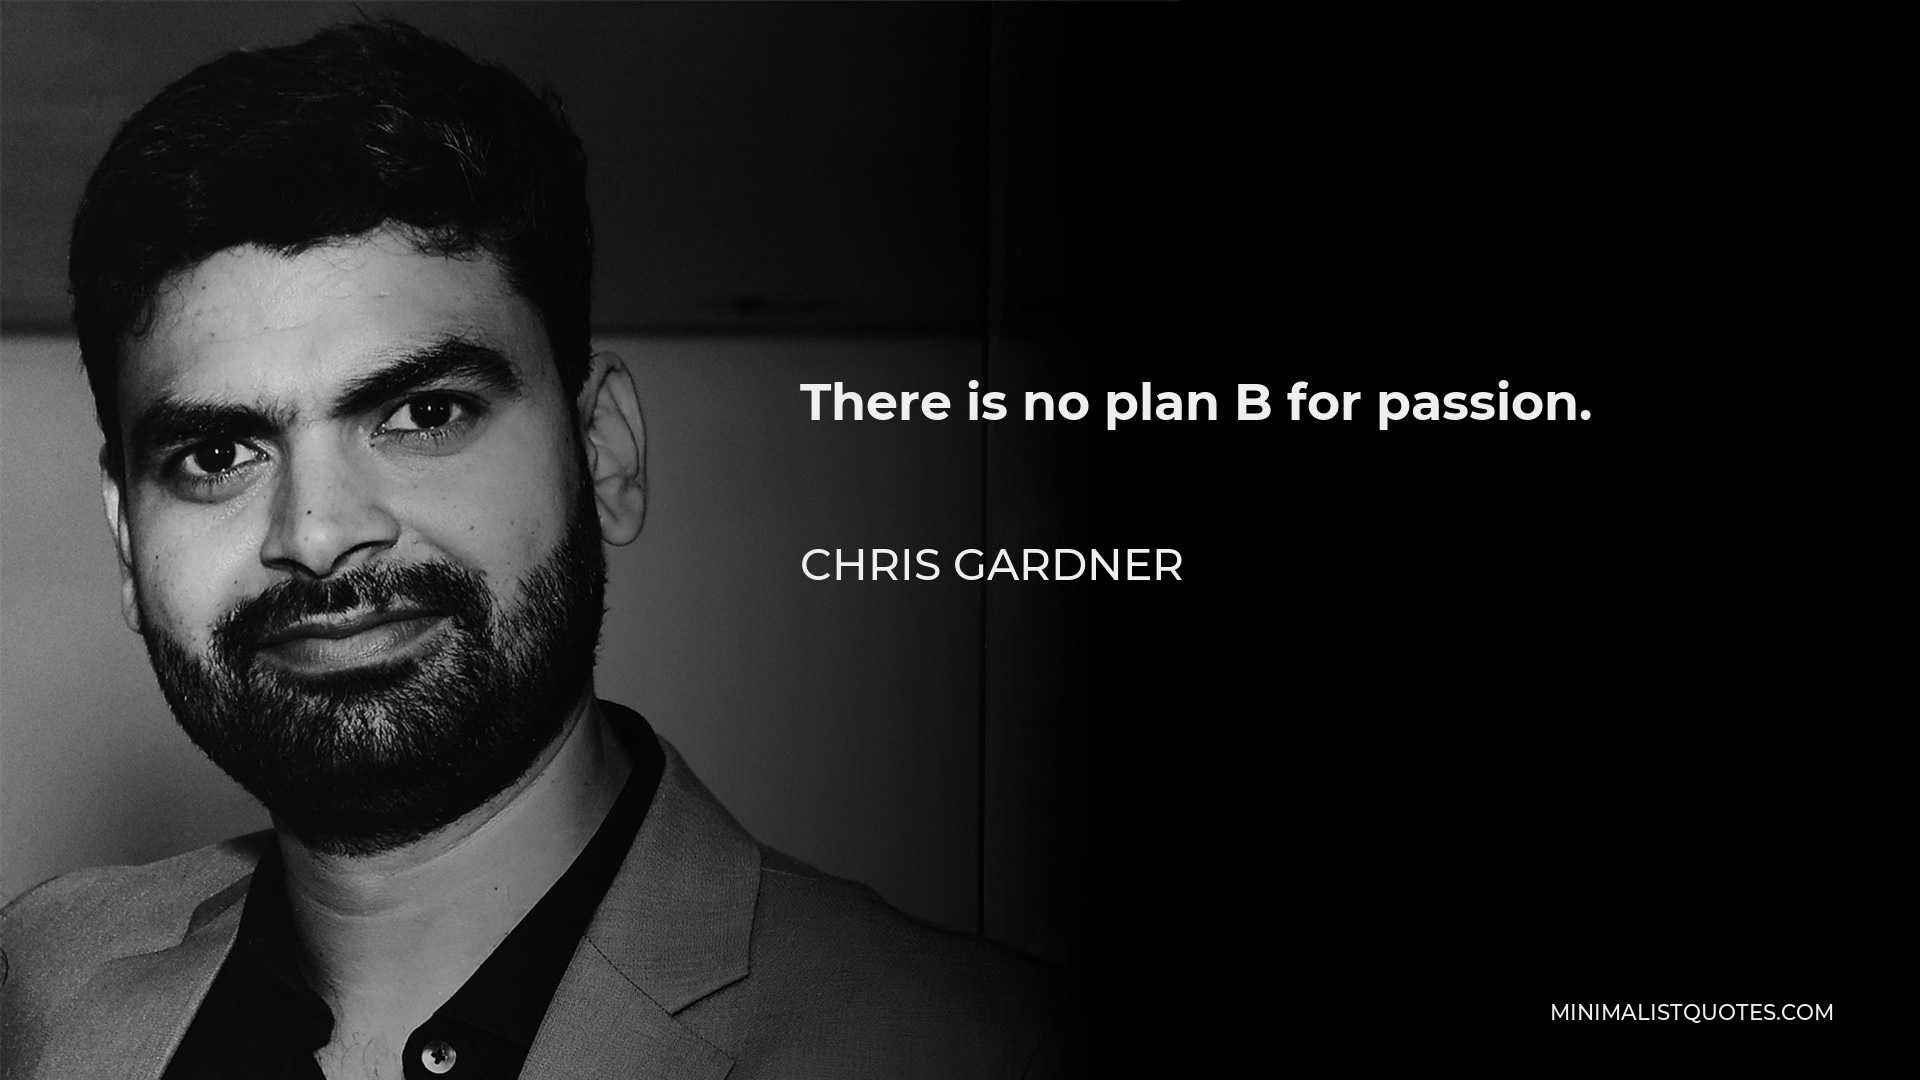 Chris Gardner Quote - There is no plan B for passion.